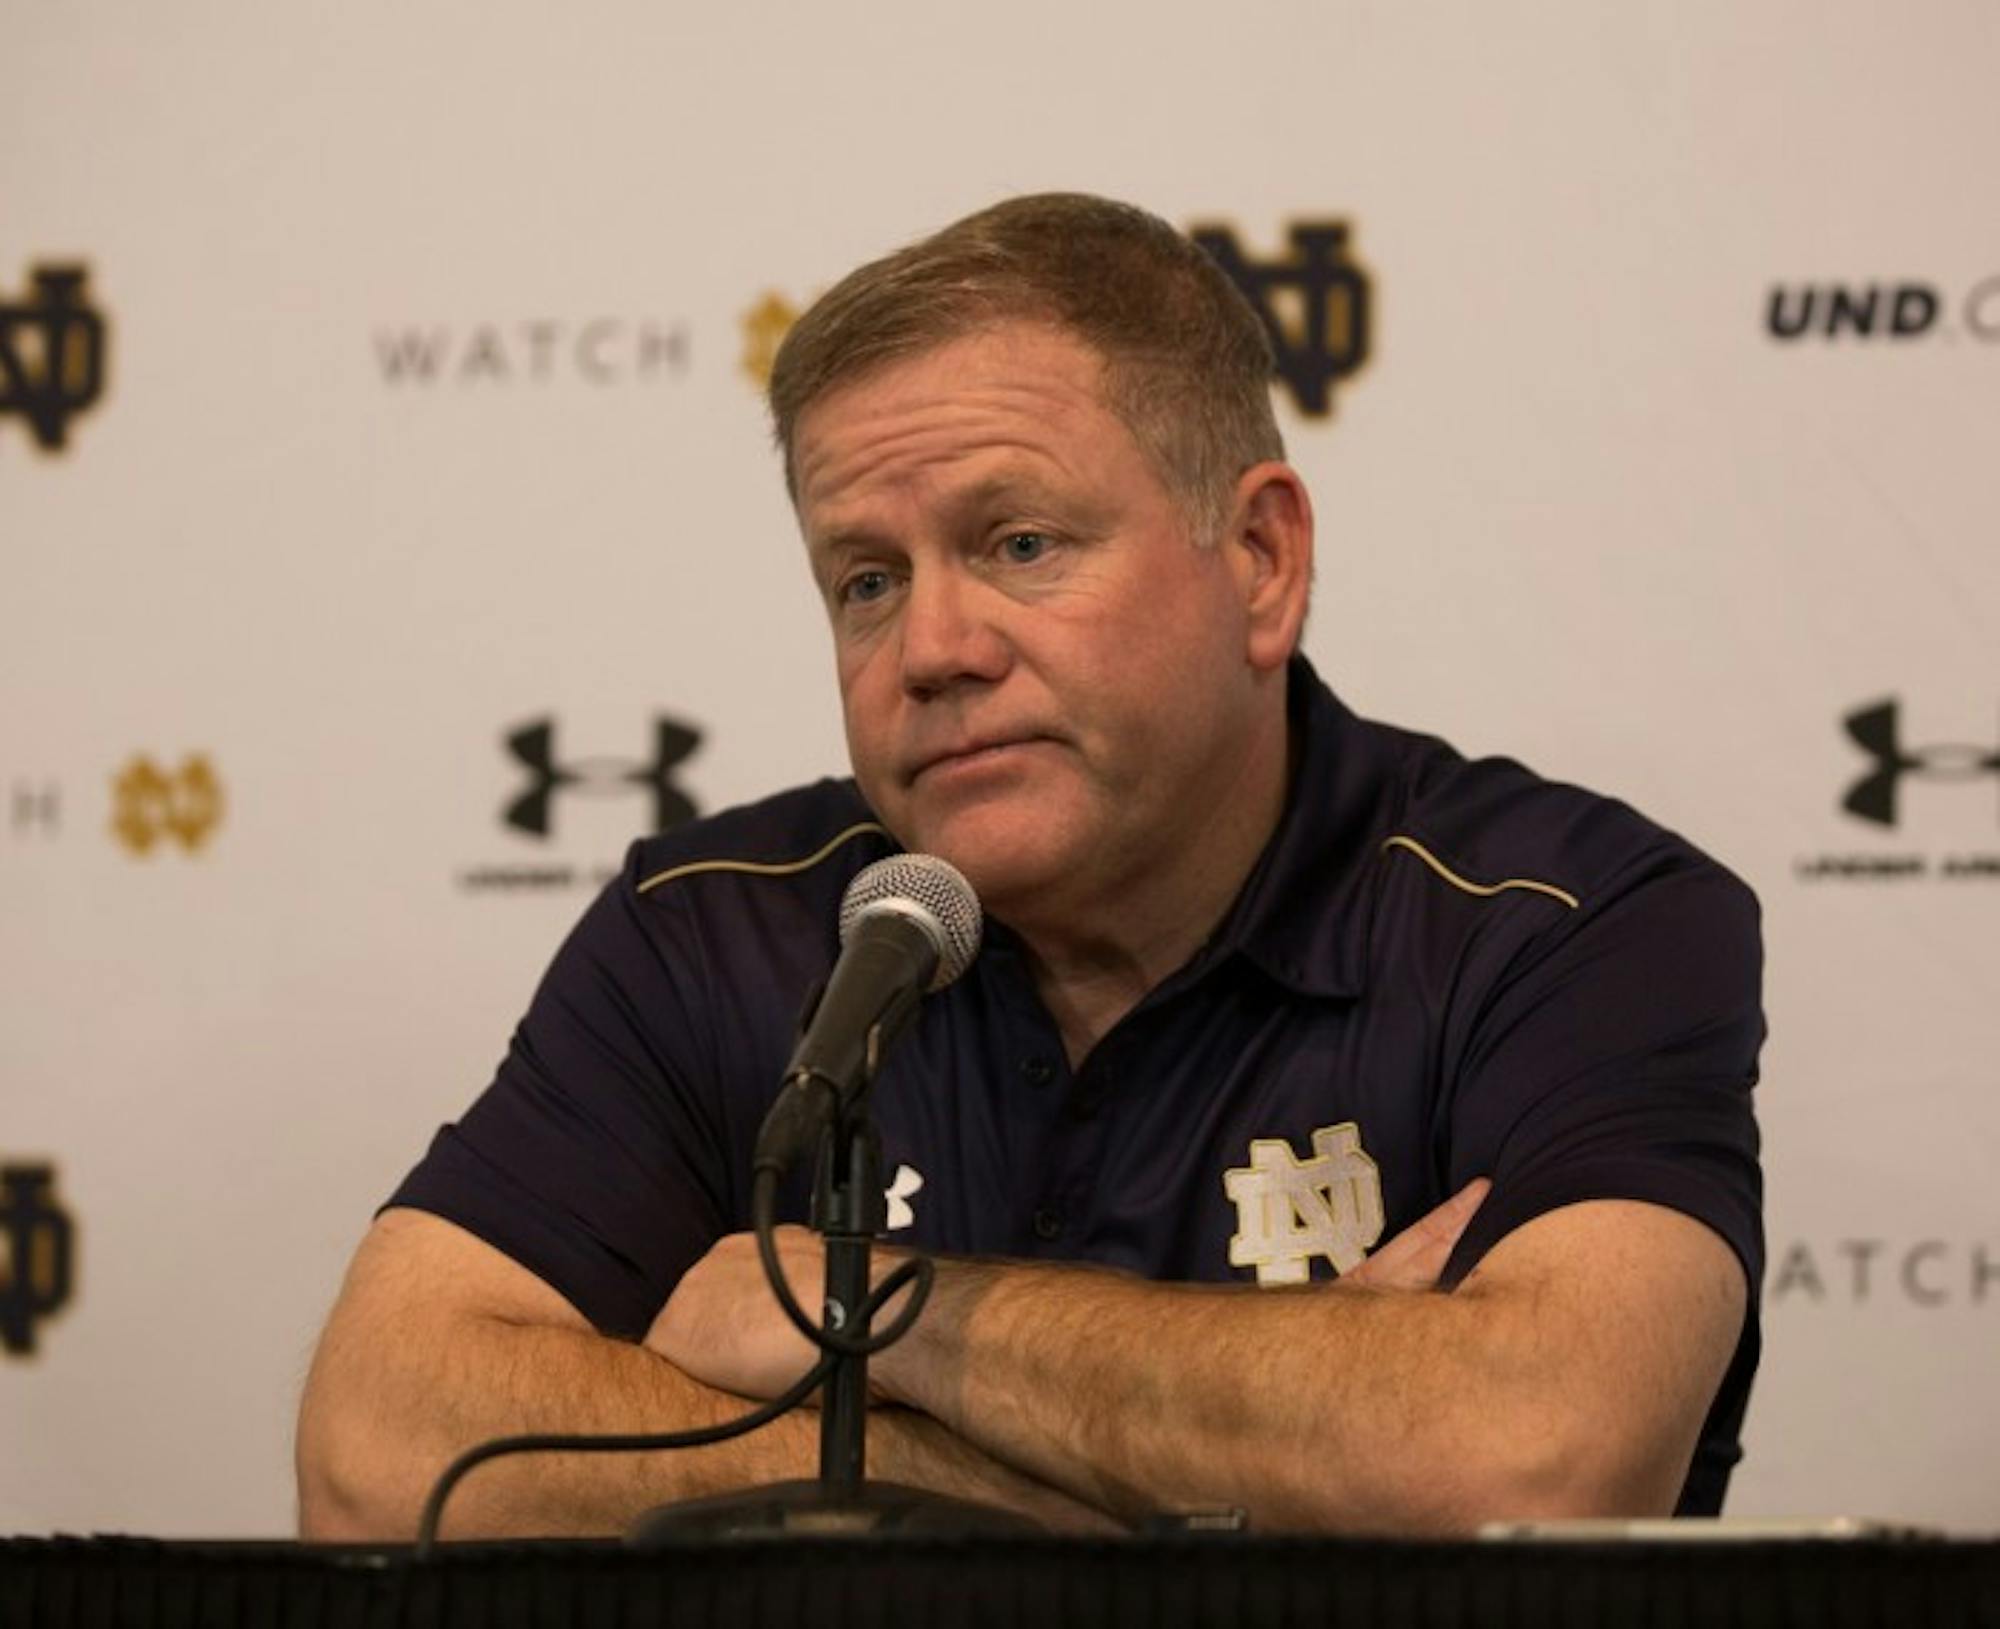 Irish coach Brian Kelly speaks to reporters after the Irish lost to USC, 49-14, on Nov. 29. Notre Dame will appear in the Franklin American Mortgage Music City Bowl against LSU in Nashville, Tennessee on Dec. 30.